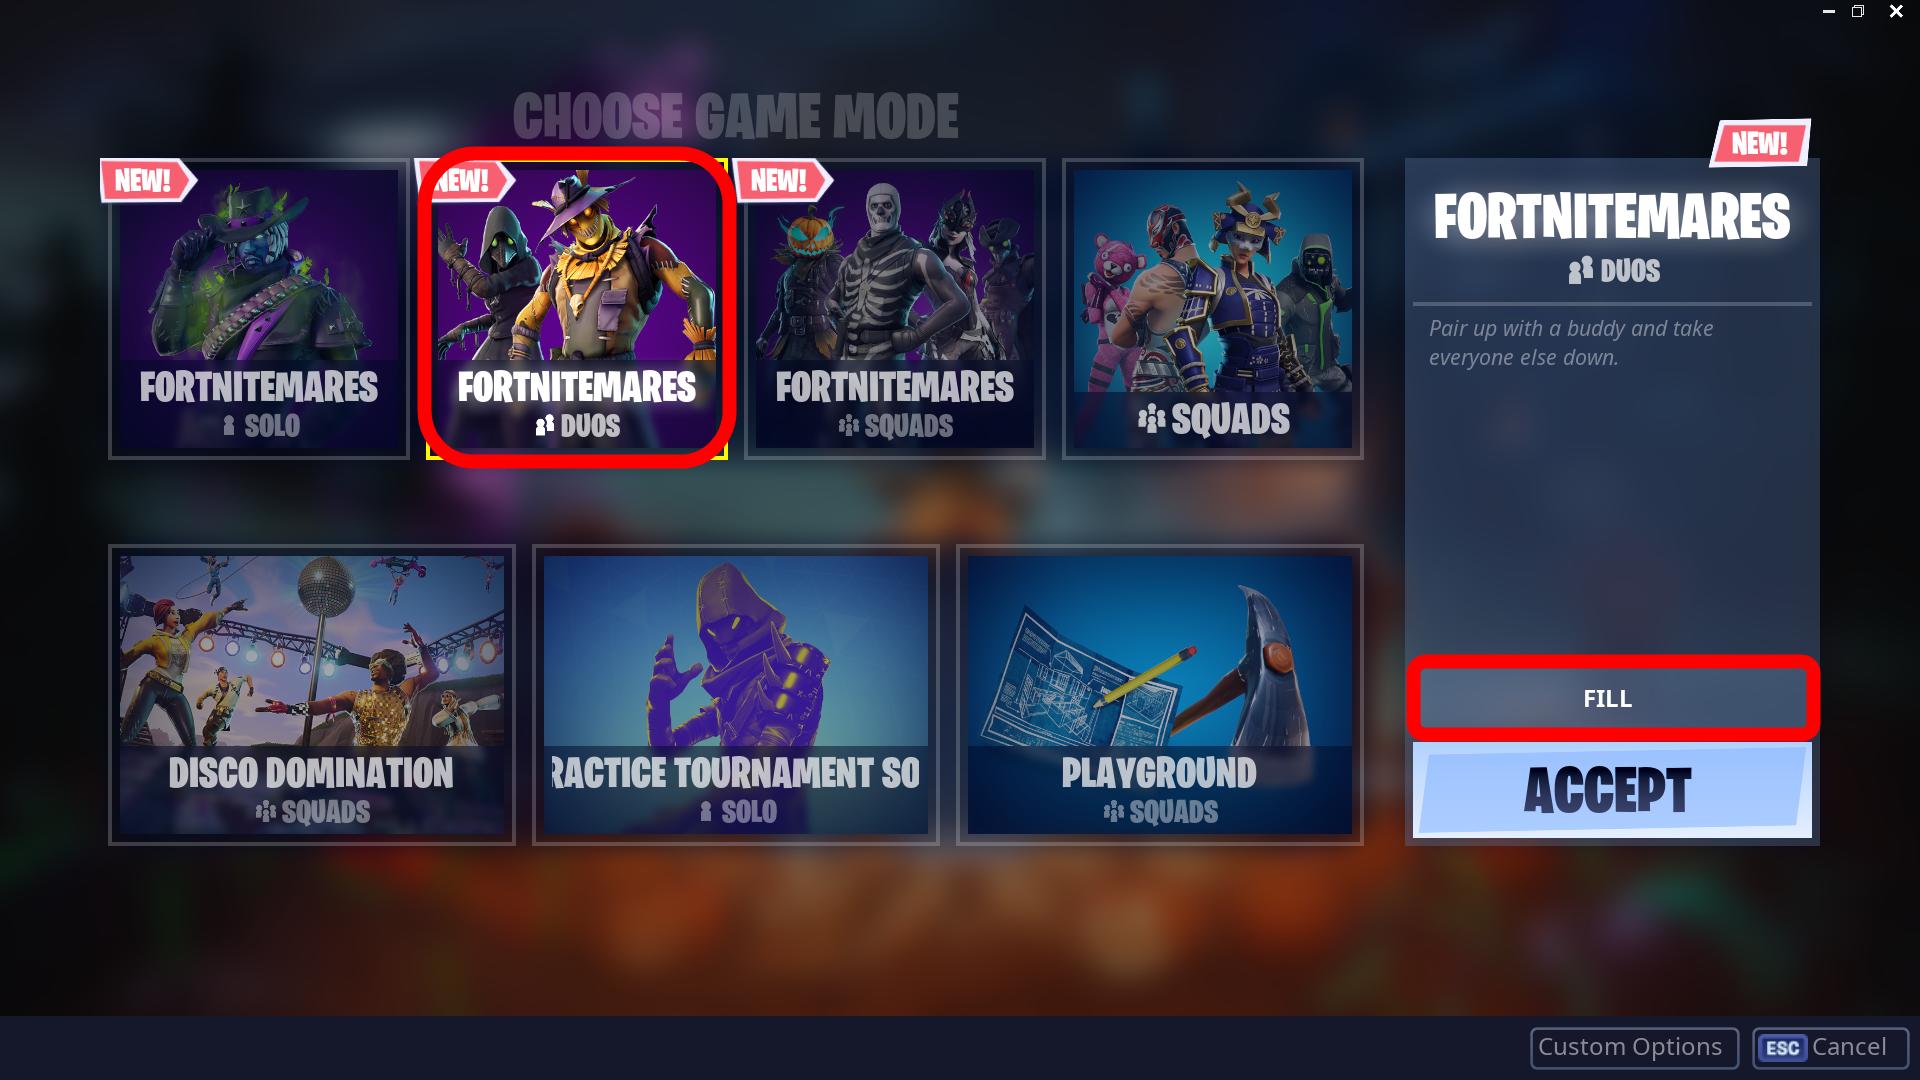 and fortnite will matchmake you with other players online otherwise if you select don t fill you may have to compete against a team of four alone - fortnite pc keys